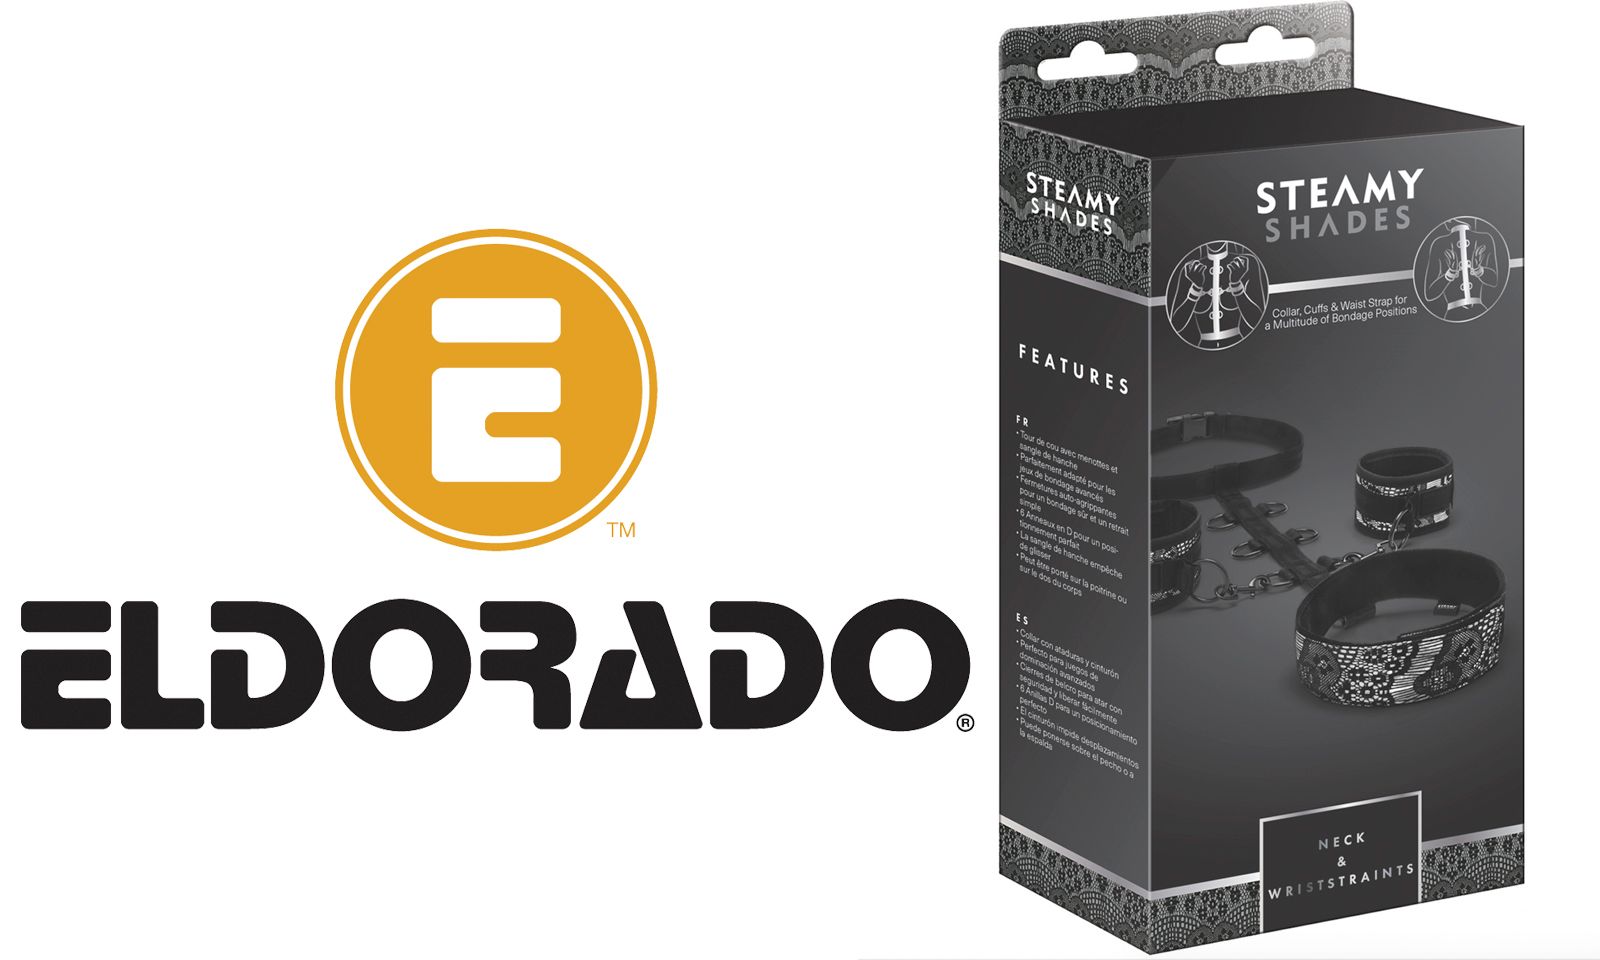 Eldorado Exclusively Carrying Steamy Shades by ST Rubber